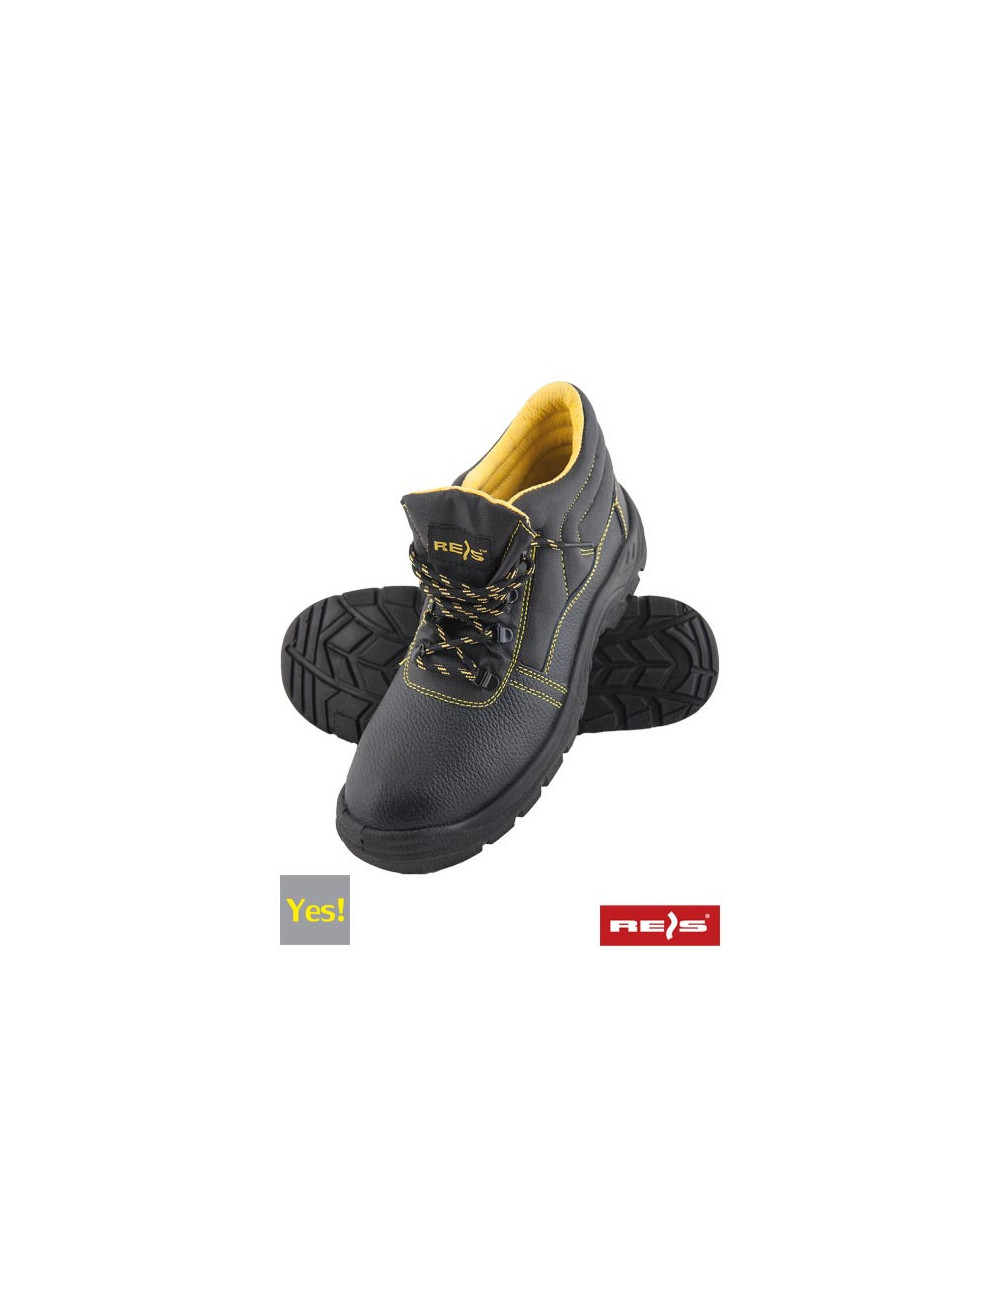 Safety shoes bryes-t-sb by black-yellow Reis